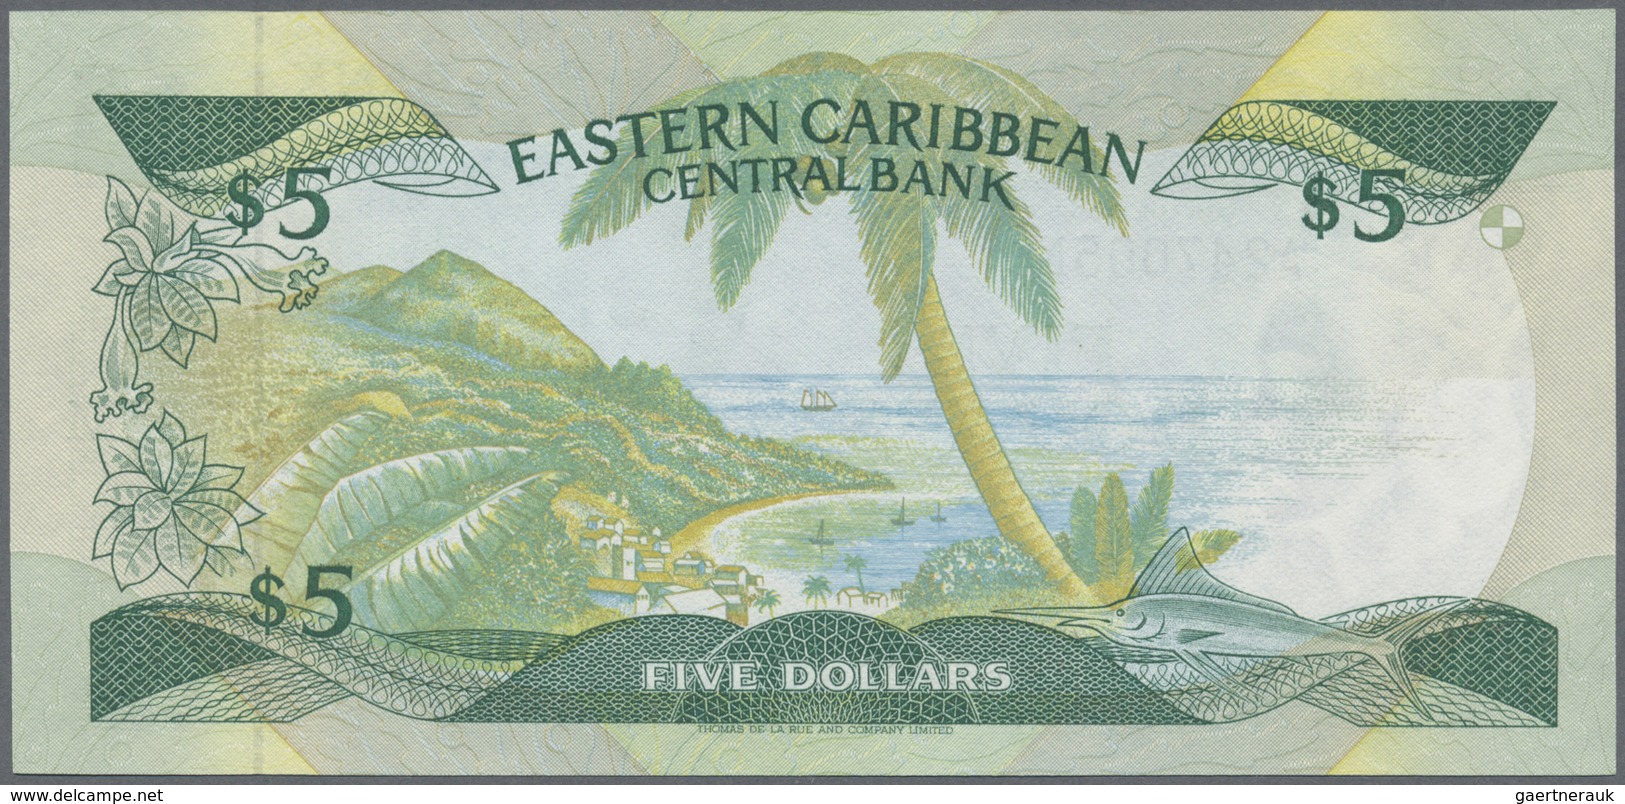 East Caribbean States / Ostkaribische Staaten: Set with 8 Banknotes 1980's, comprising 1 and 4 x 5 D